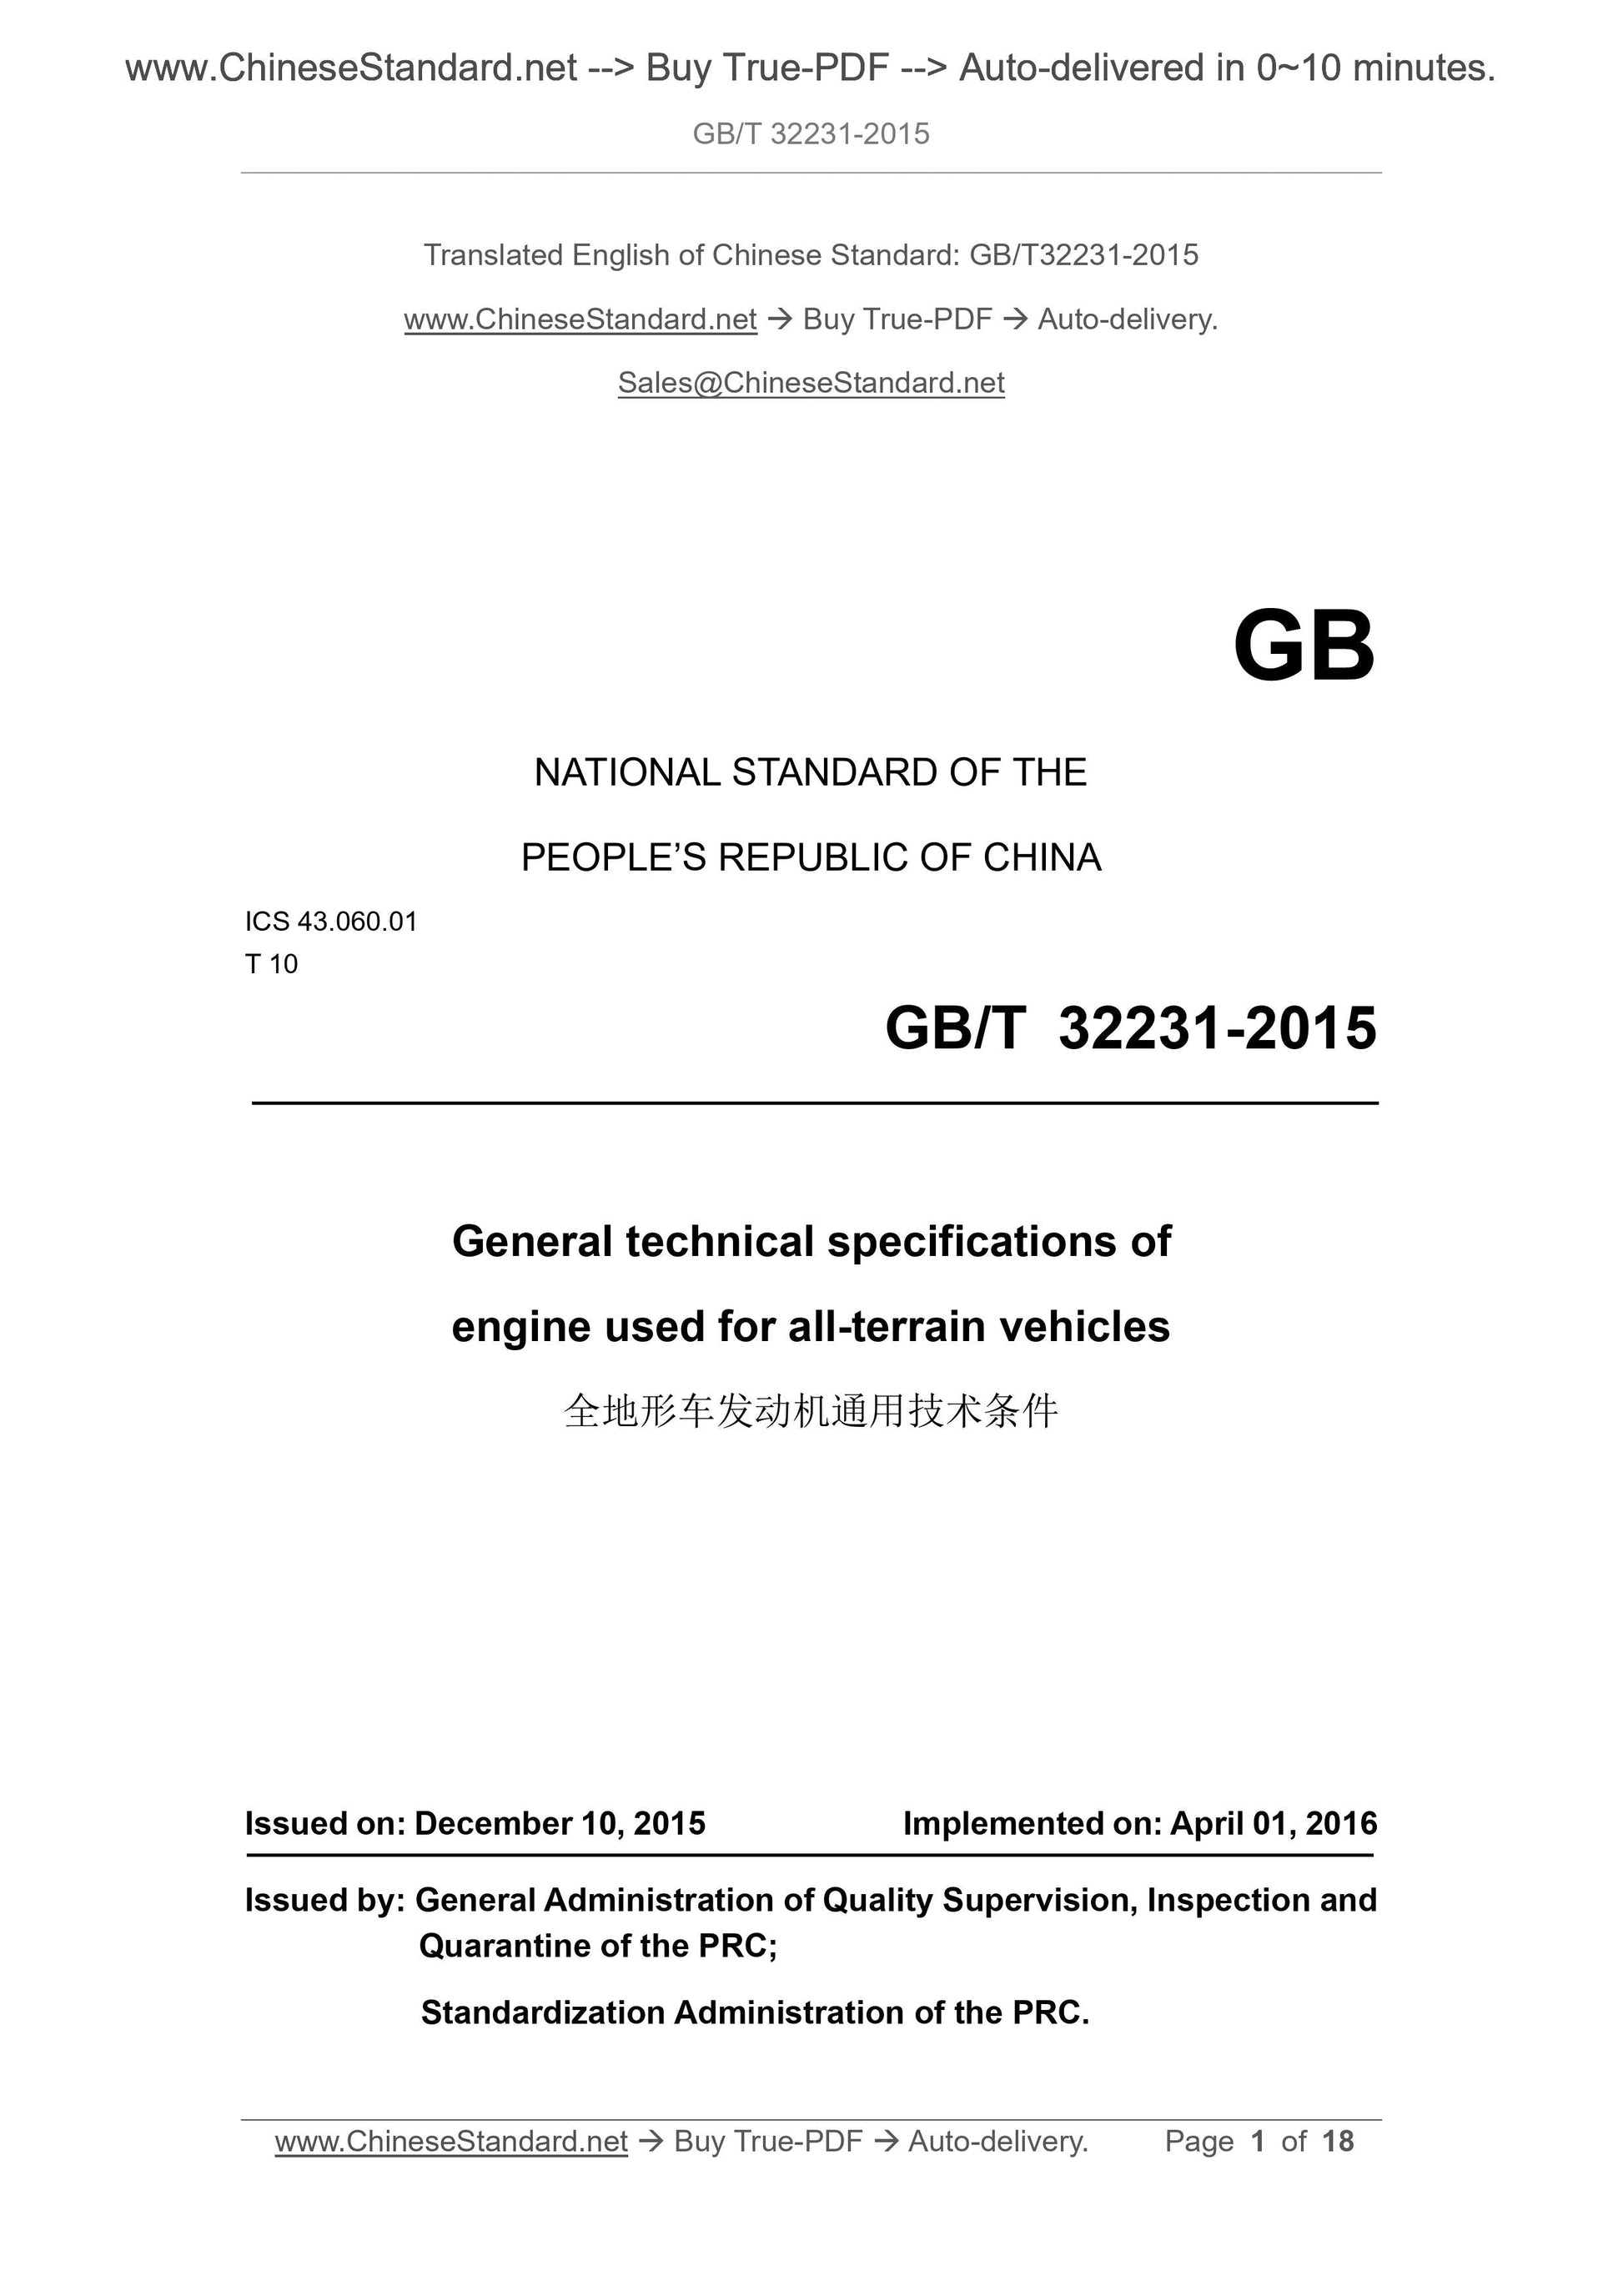 GB/T 32231-2015 Page 1